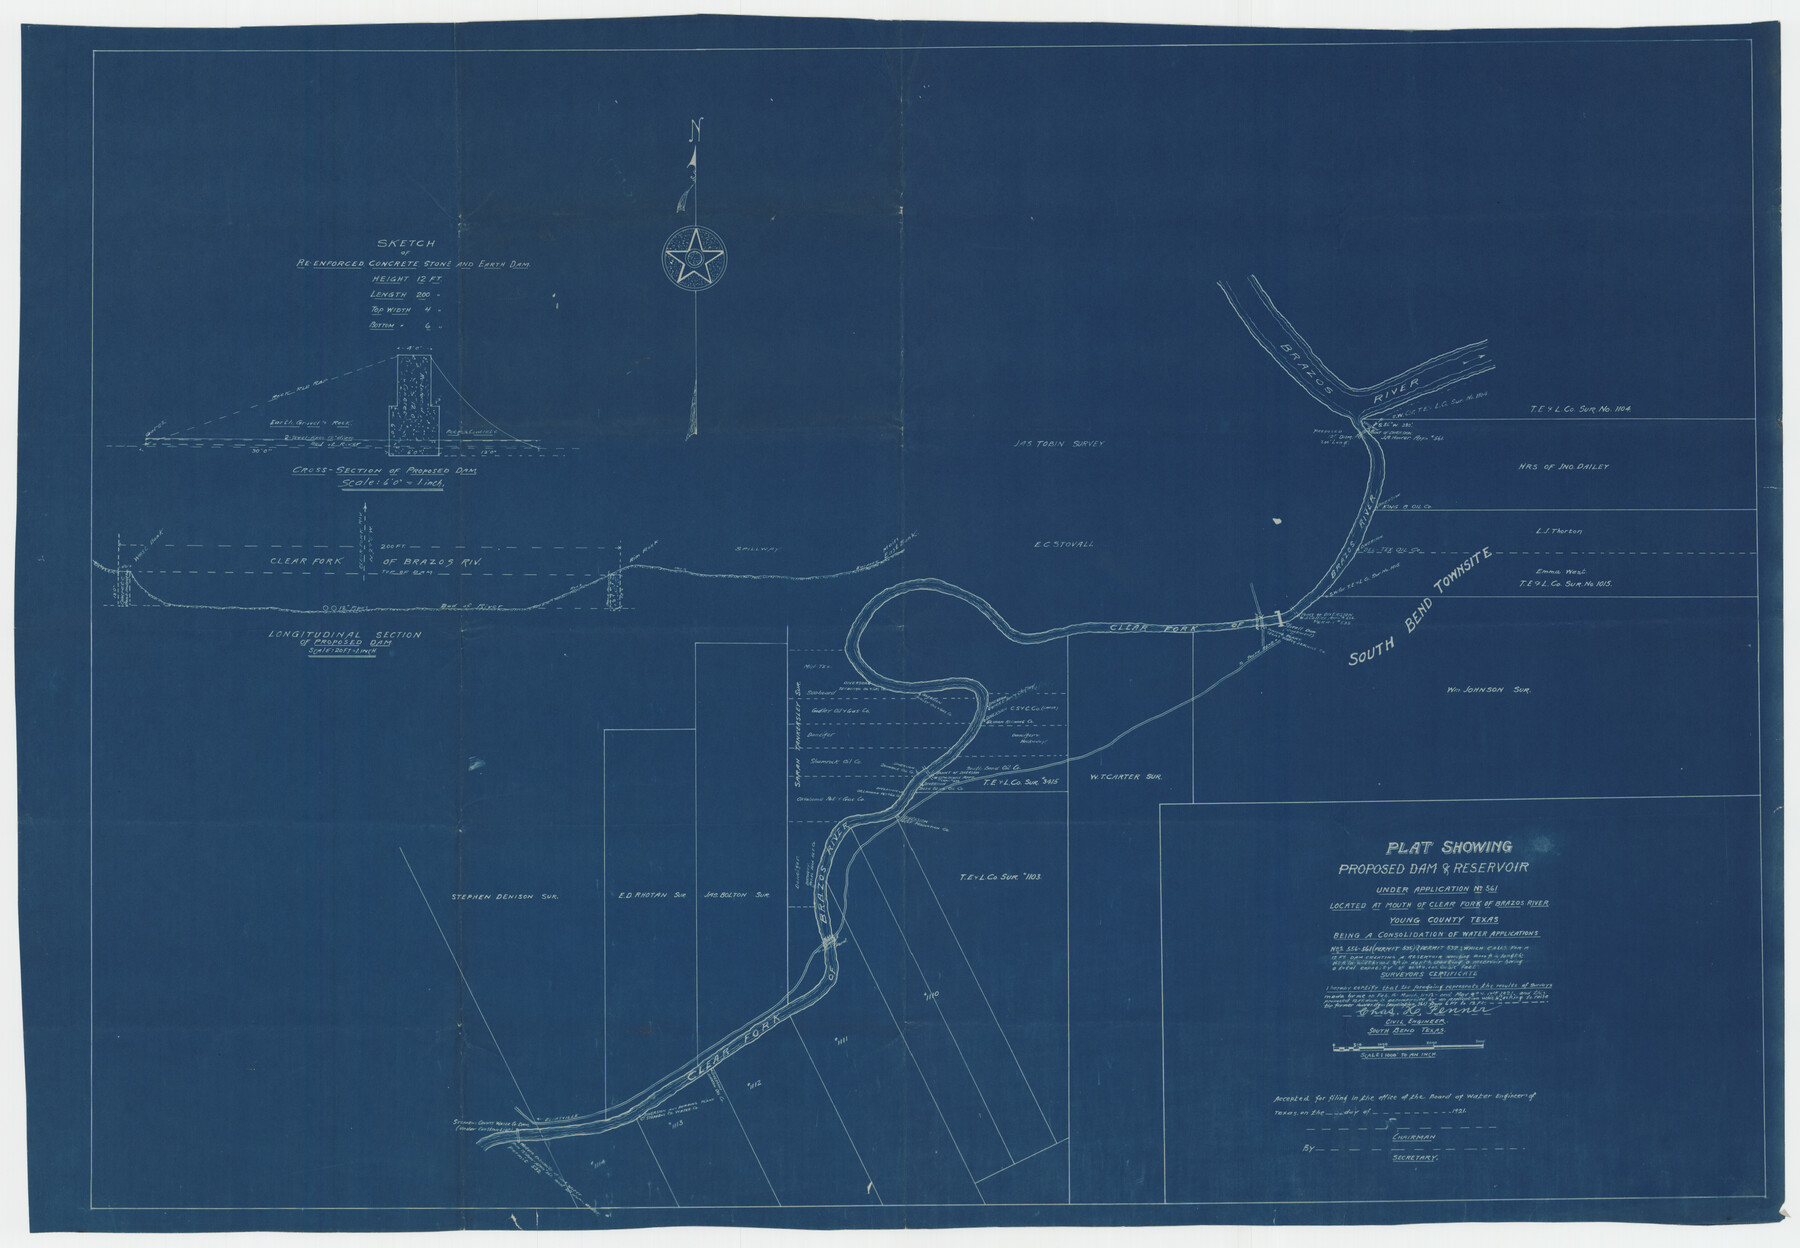 92094, Plat Showing Proposed Dam & Reservoir Under Application No. 561 Located at Mouth of Clear Fork of Brazos River, Twichell Survey Records